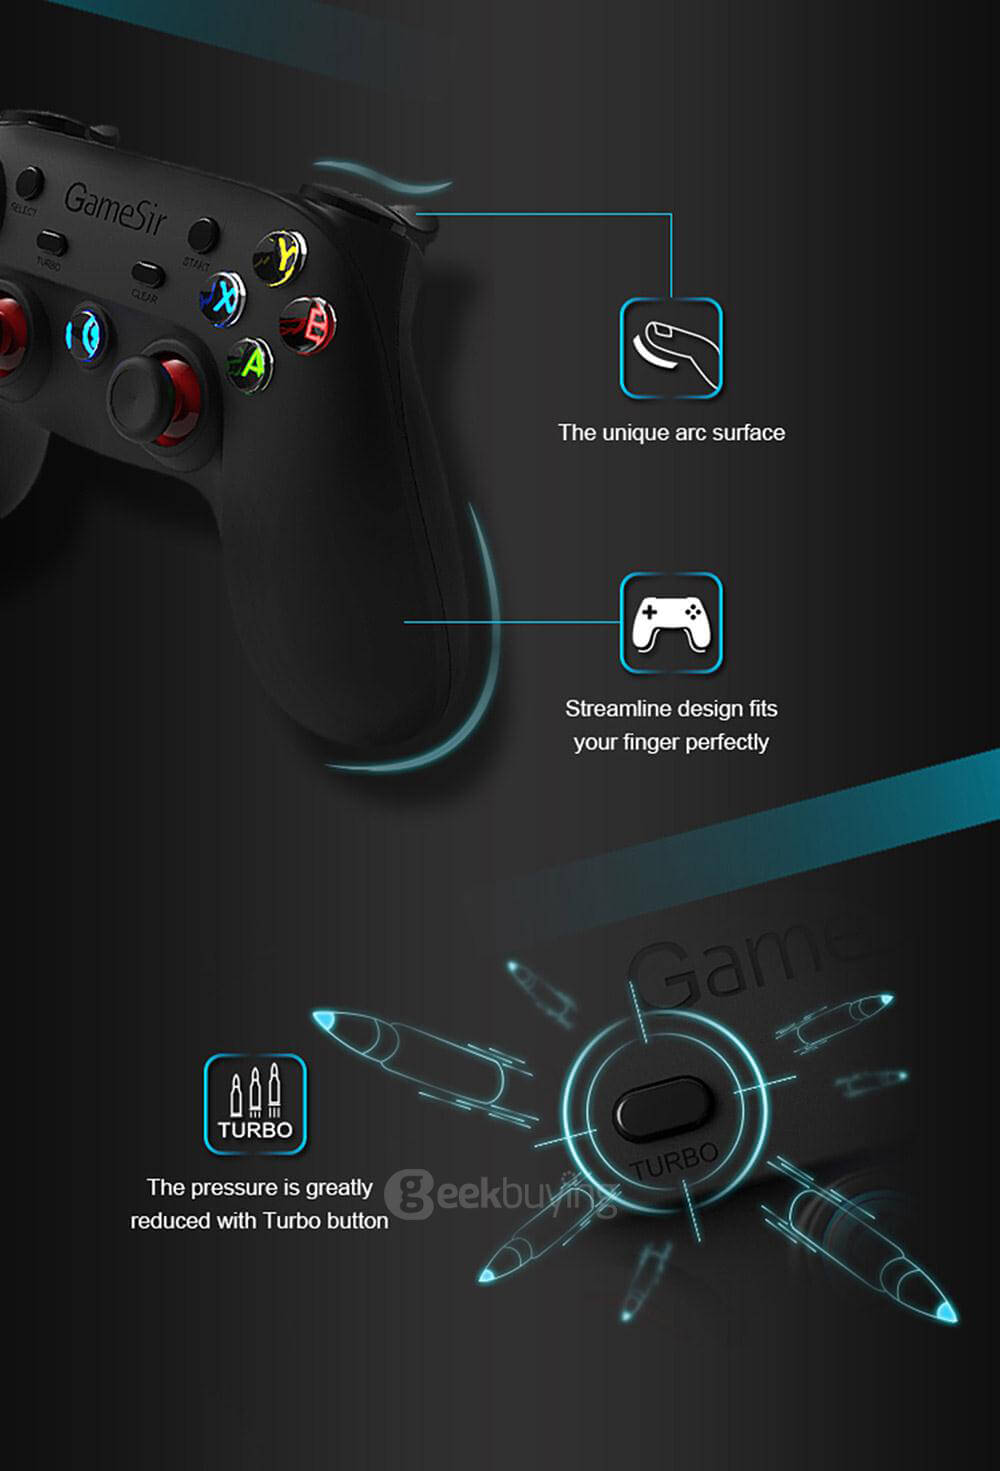 gamesir g3w wired pc controller driver